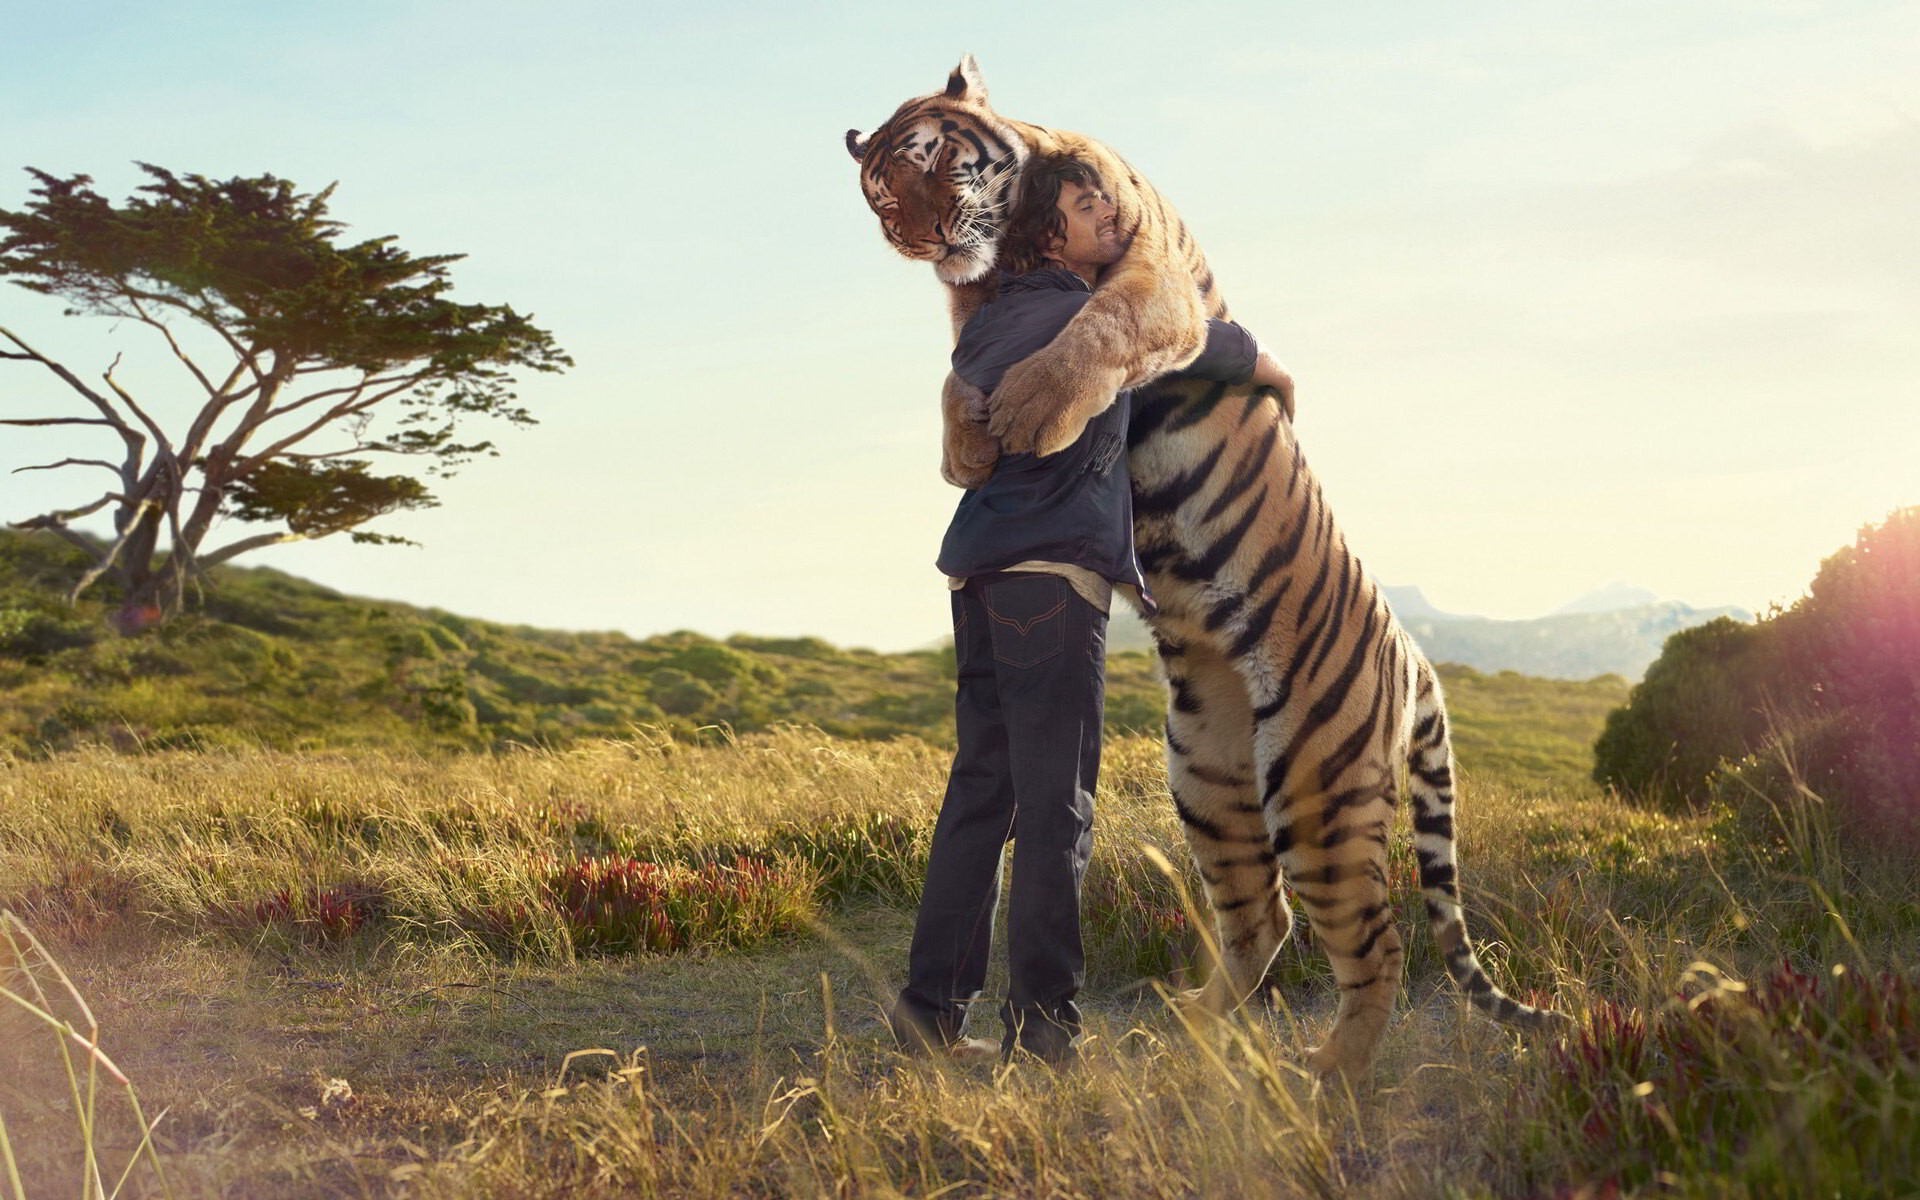 Man and tiger hug, Symbolic bond, Powerful connection, Unconditional affection, 1920x1200 HD Desktop